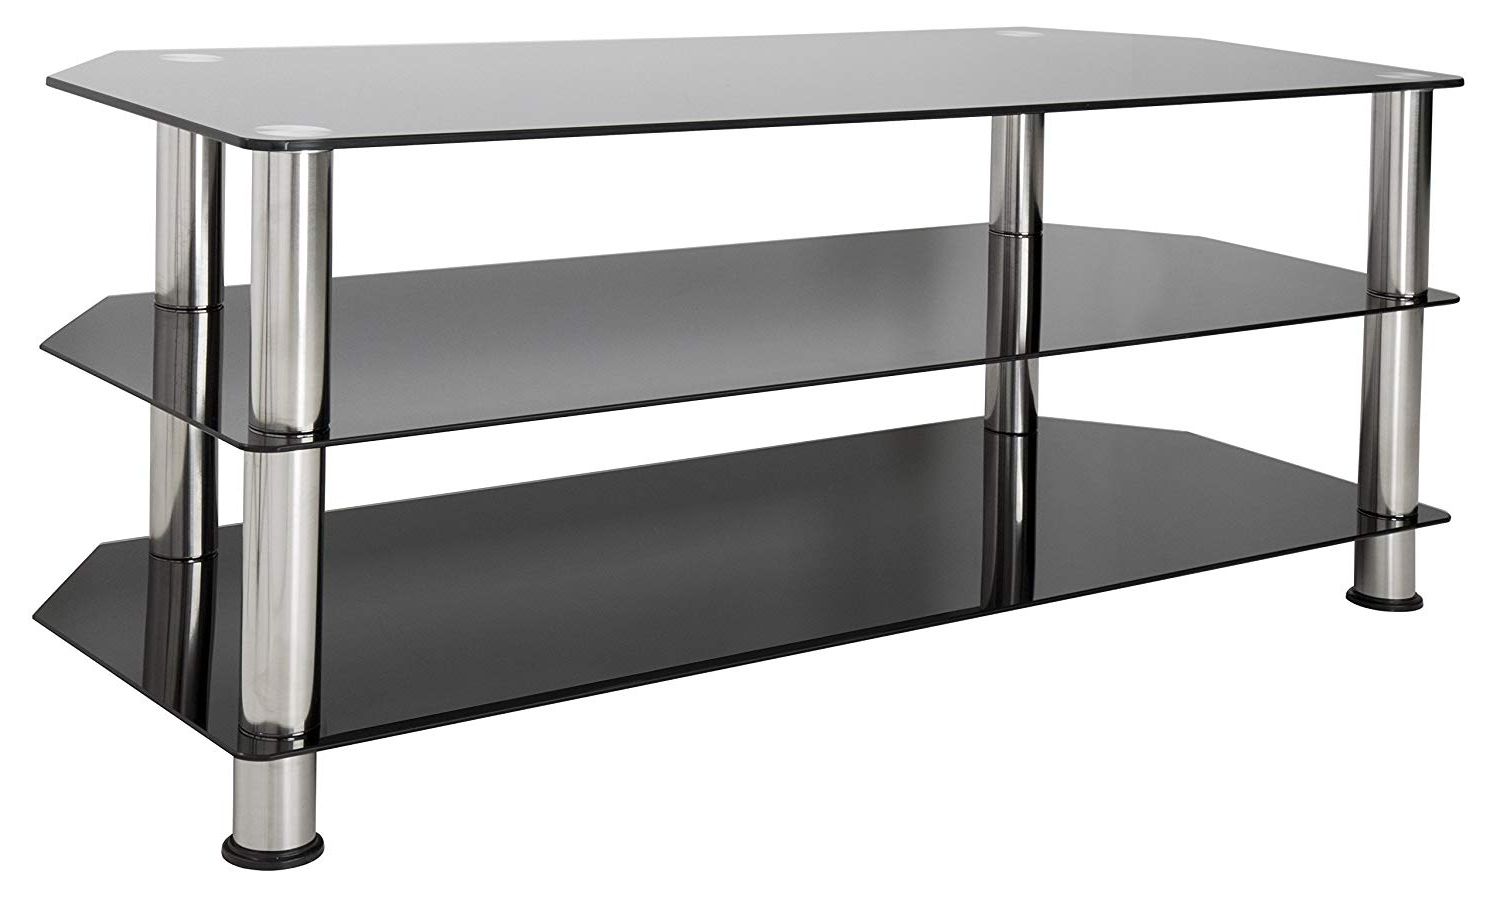 Most Recently Released Amazon: Avf Sdc1140 A Tv Stand For Up To 55 Inch Tvs, Black Pertaining To Modern Glass Tv Stands (Photo 10 of 20)